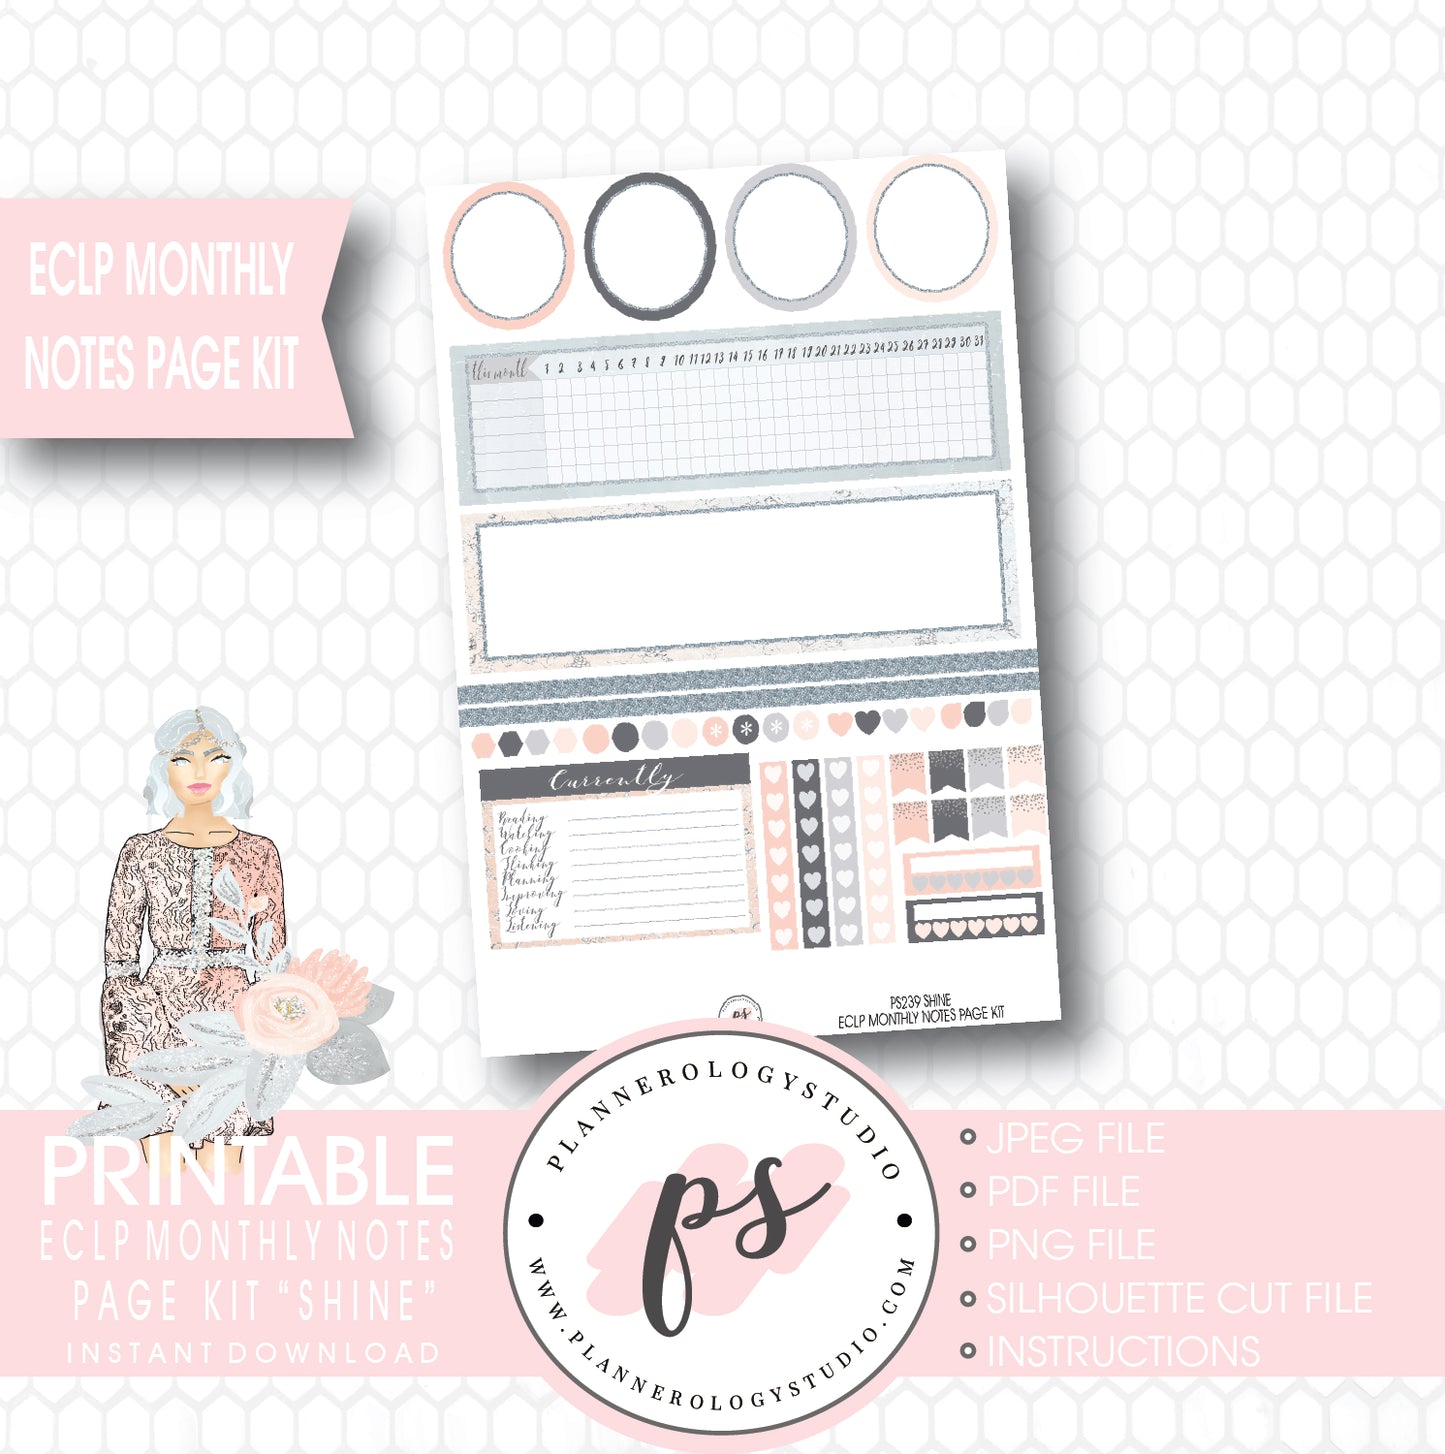 Shine Monthly Notes Page Kit Printable Planner Stickers (for use with ECLP) - Plannerologystudio